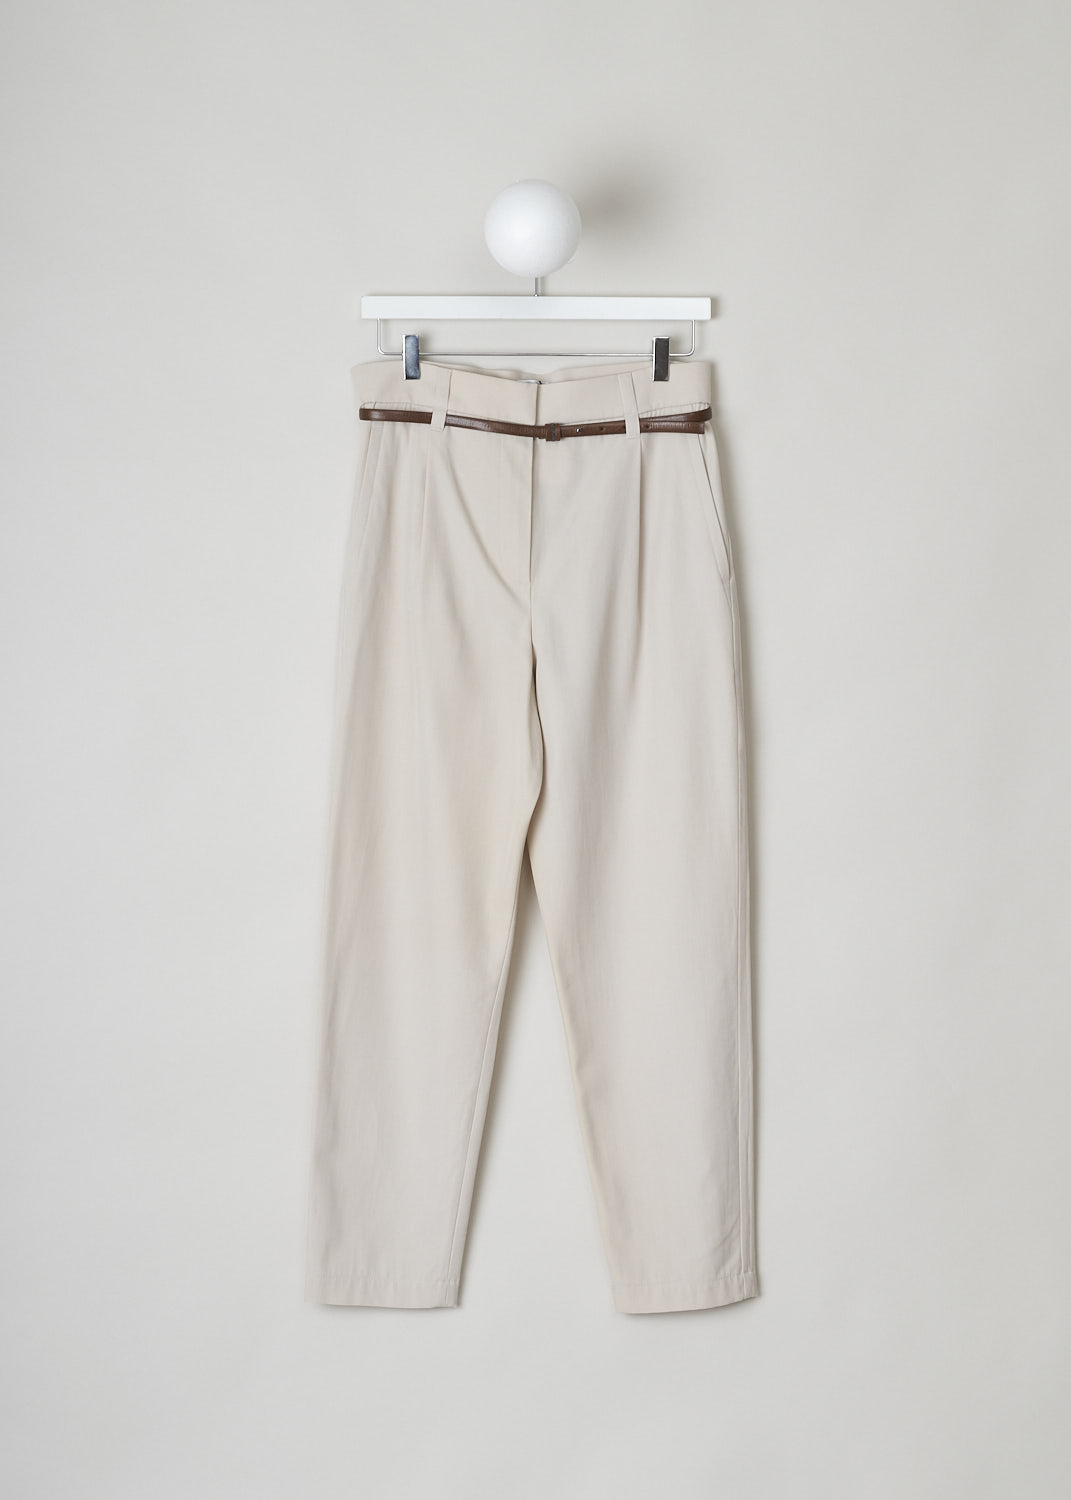 BRUNELLO CUCINELLI, BEIGE PANTS WITH TAPERED LEGS, MA033P7379_C8501, Beige, Front, These beige pleated pants have a half elasticated waistband. The waistband has both broad and a narrow belt loops and comes with a brown leather belt through the narrow belt loops. A concealed snap button and zipper function as the closure option. These pants have a pleated front with tapered pant legs. Slanted pockets can be found in the front and welt pockets in the back.  
